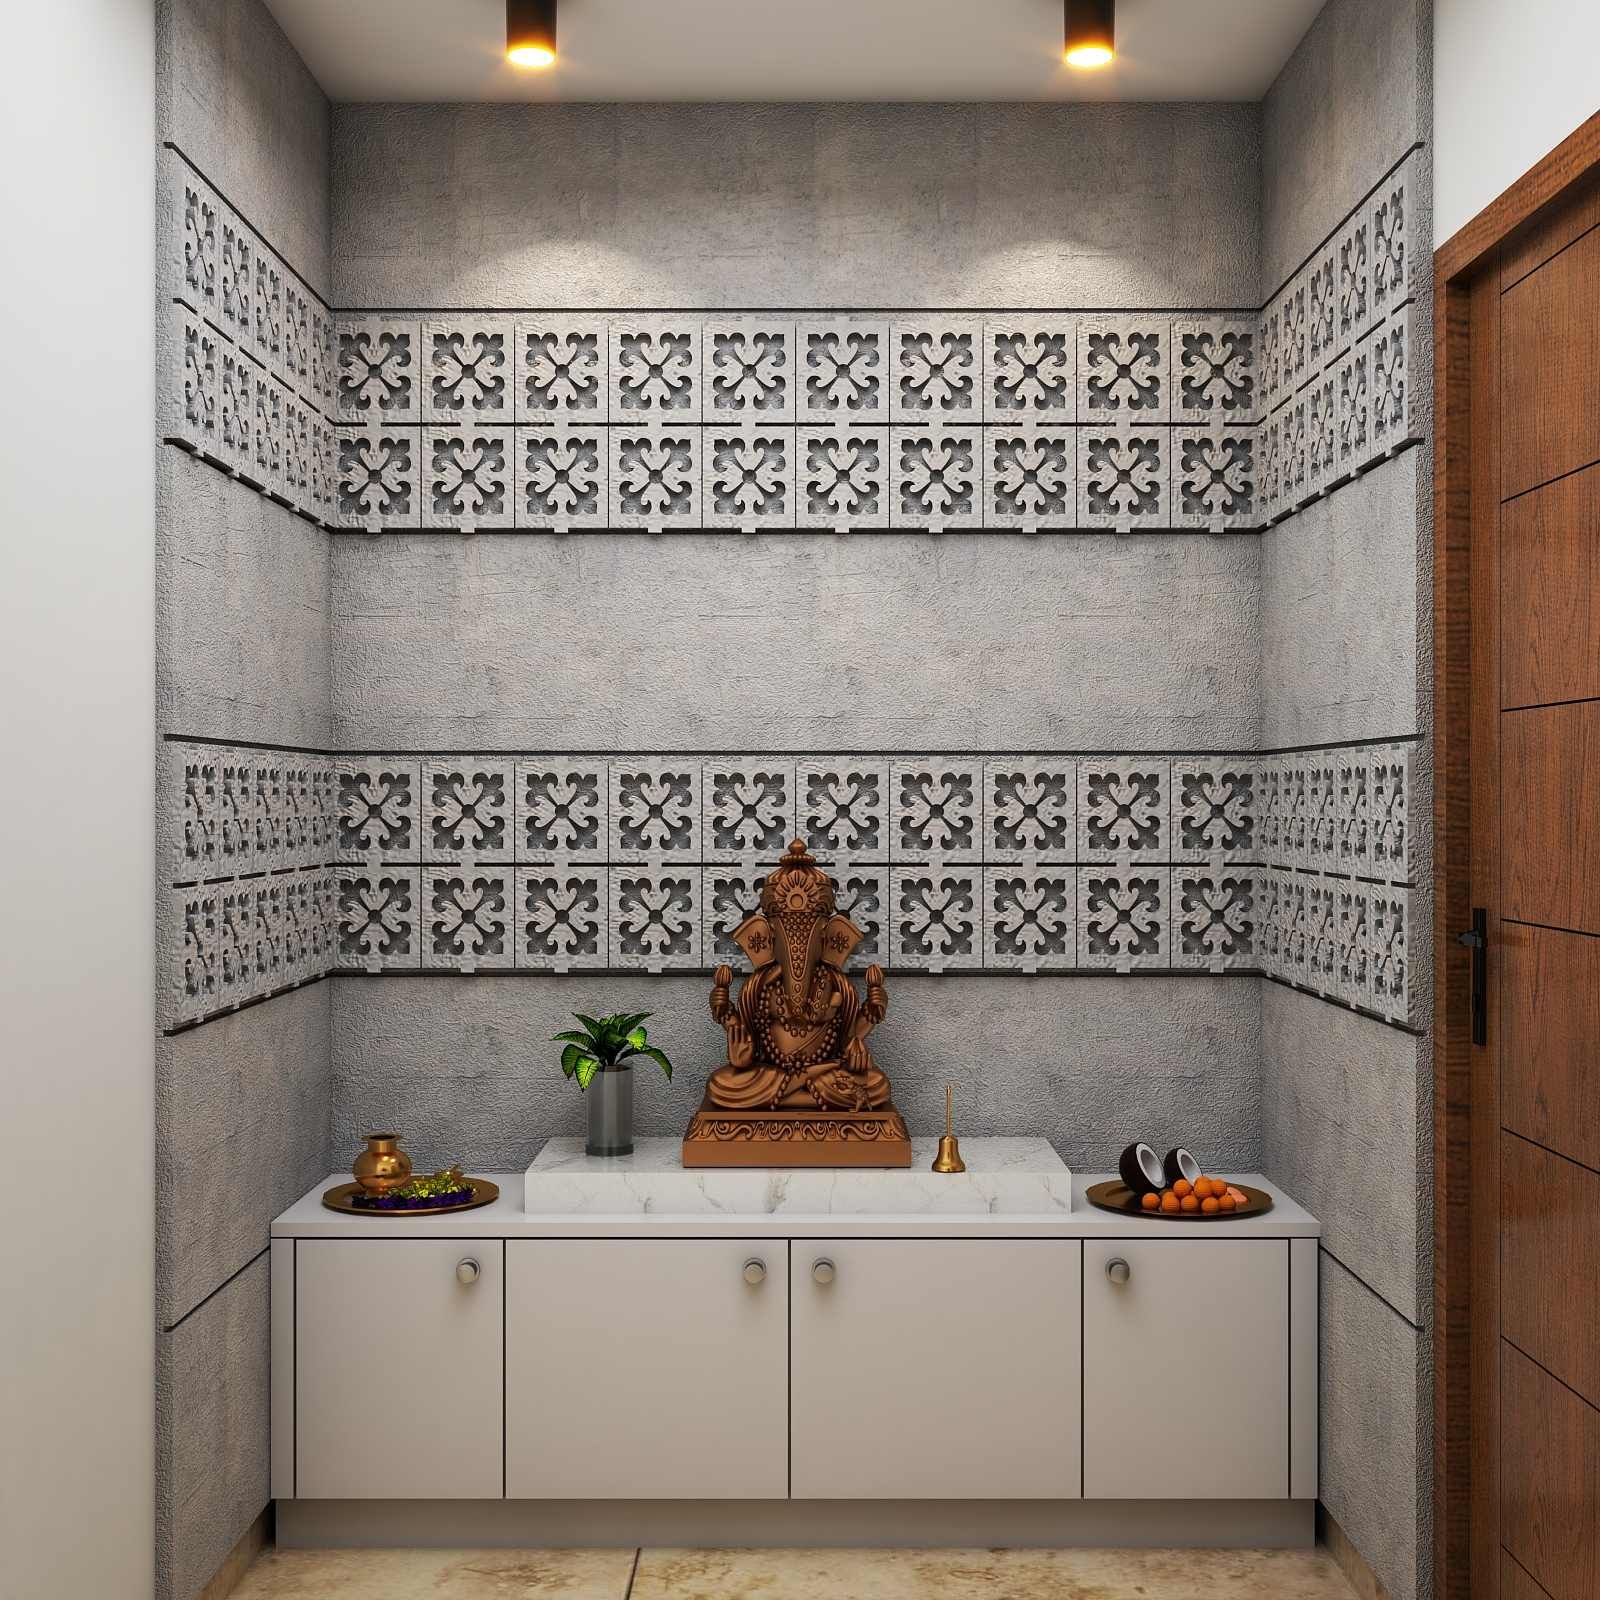 Modern Pooja Room Design With Grey Stone Cladding And Motif Design